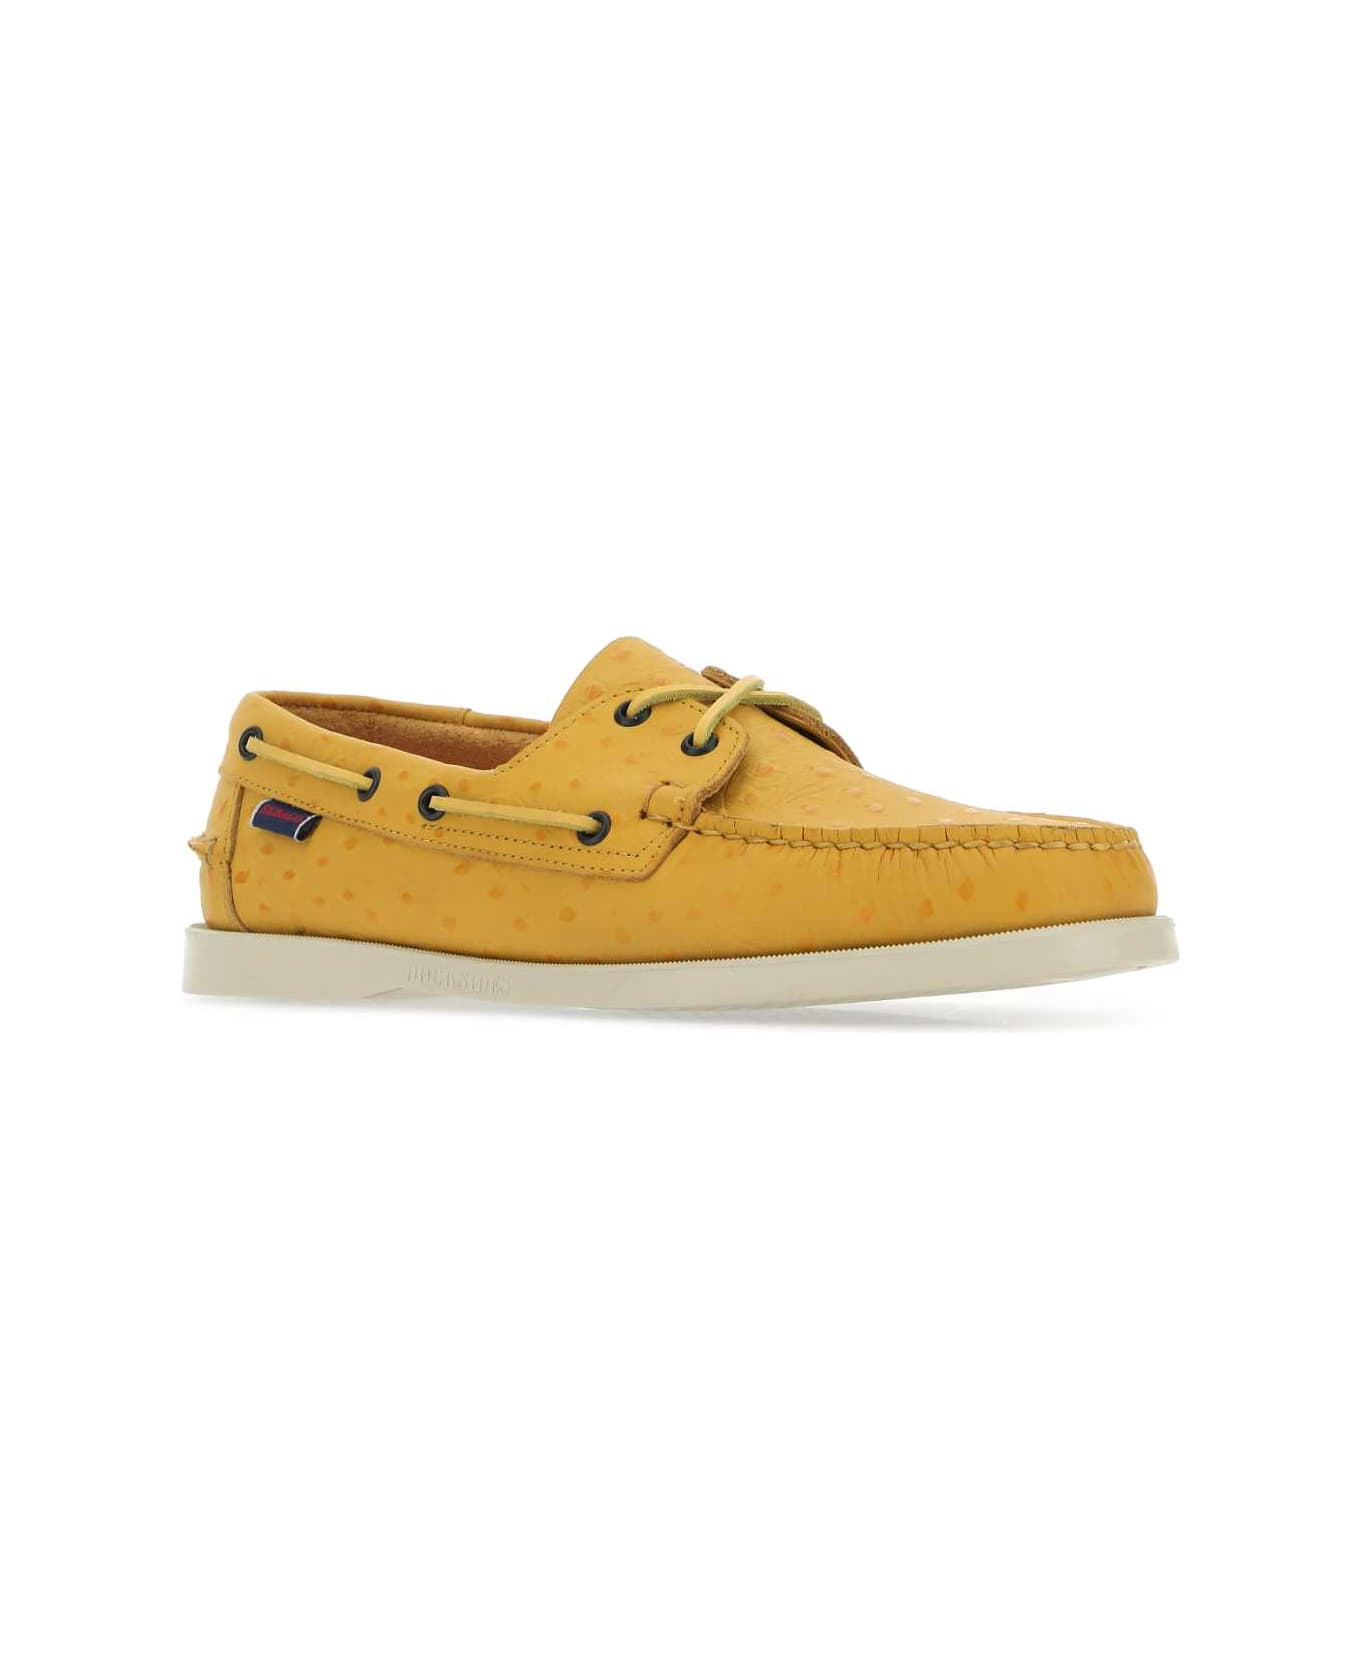 Sebago Yellow Leather Docksides Loafers - XQ9